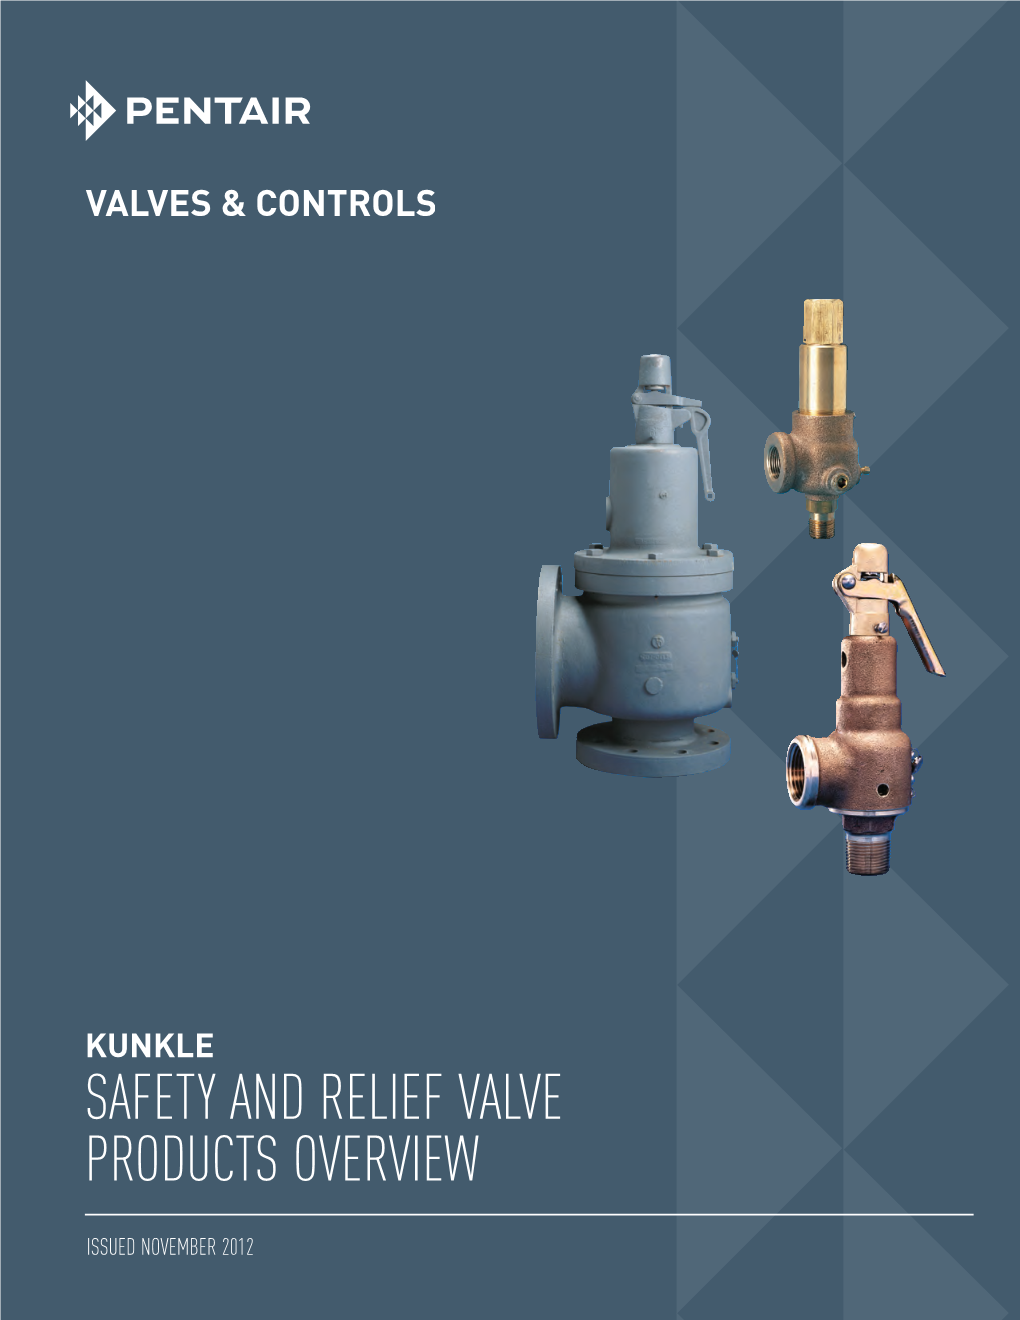 Kunkle SAFETY and RELIEF VALVE PRODUCTS OVERVIEW